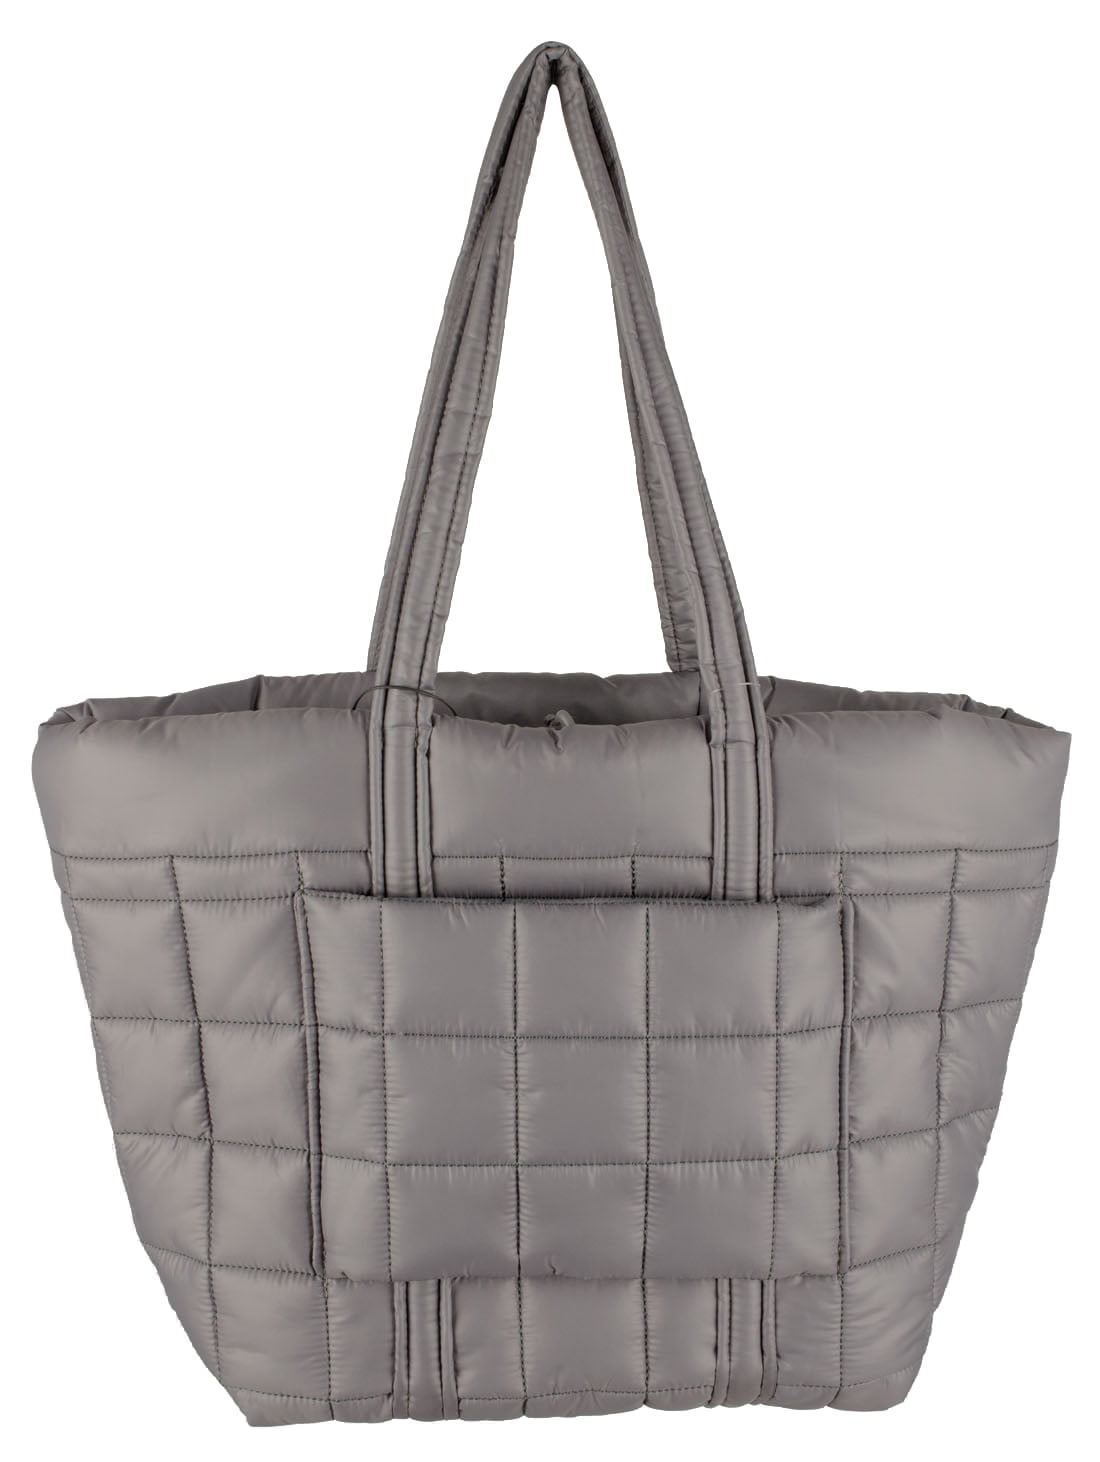 Cozy Padded Tote Bag, Charcoal Gray